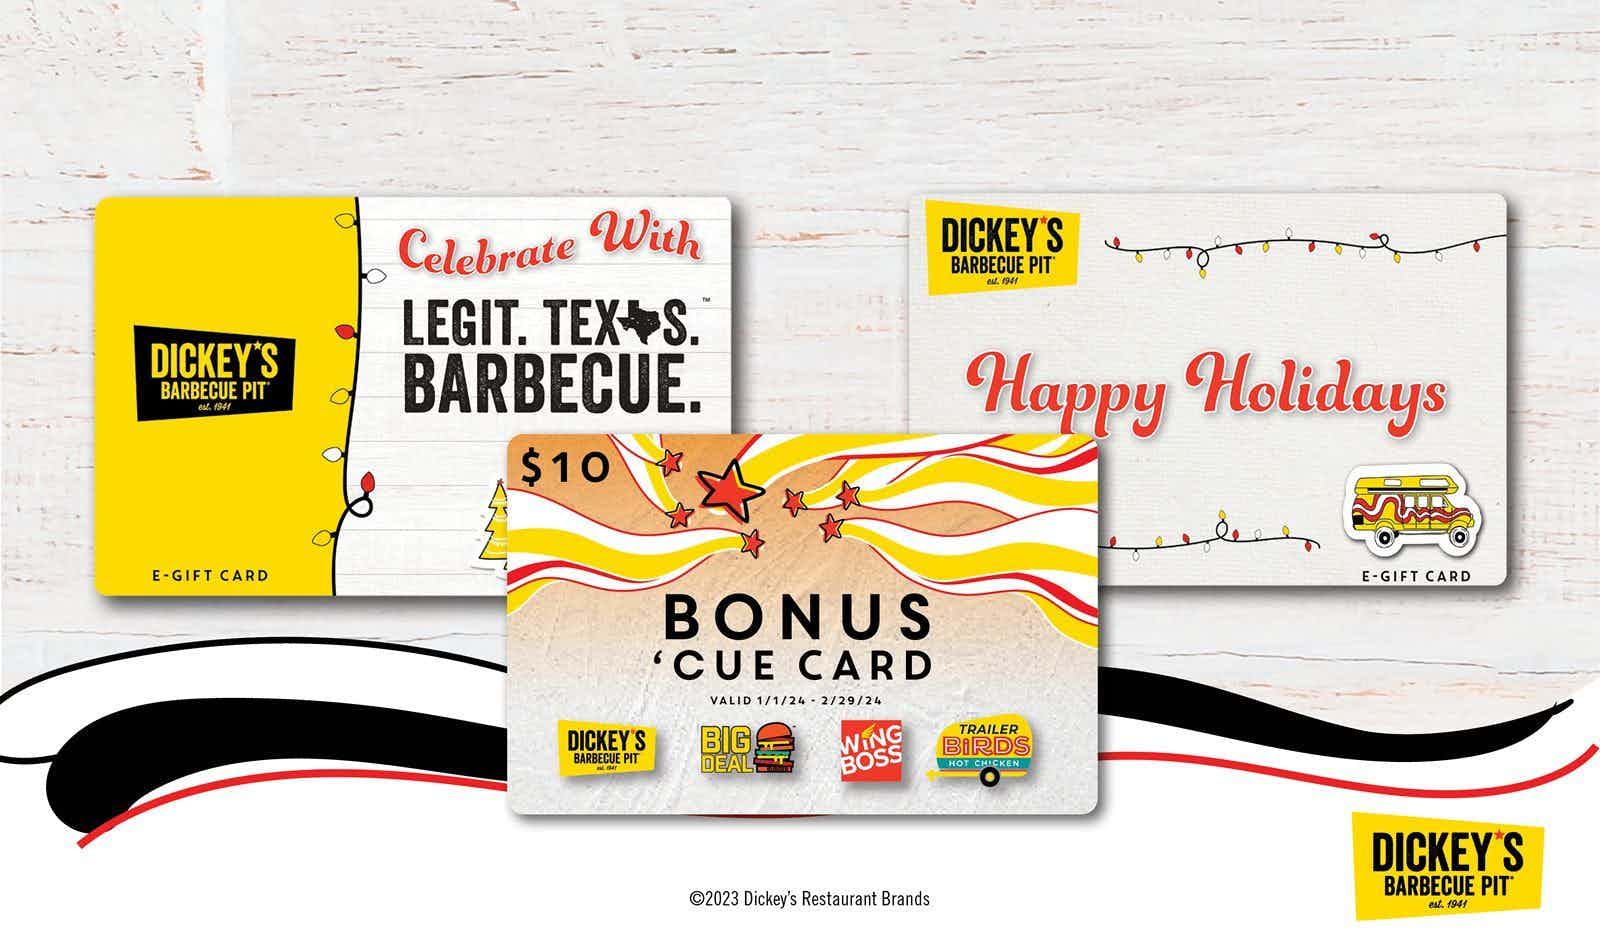 Celebrate the Season with Dickey’s Barbecue Pit Holiday Gift Cards